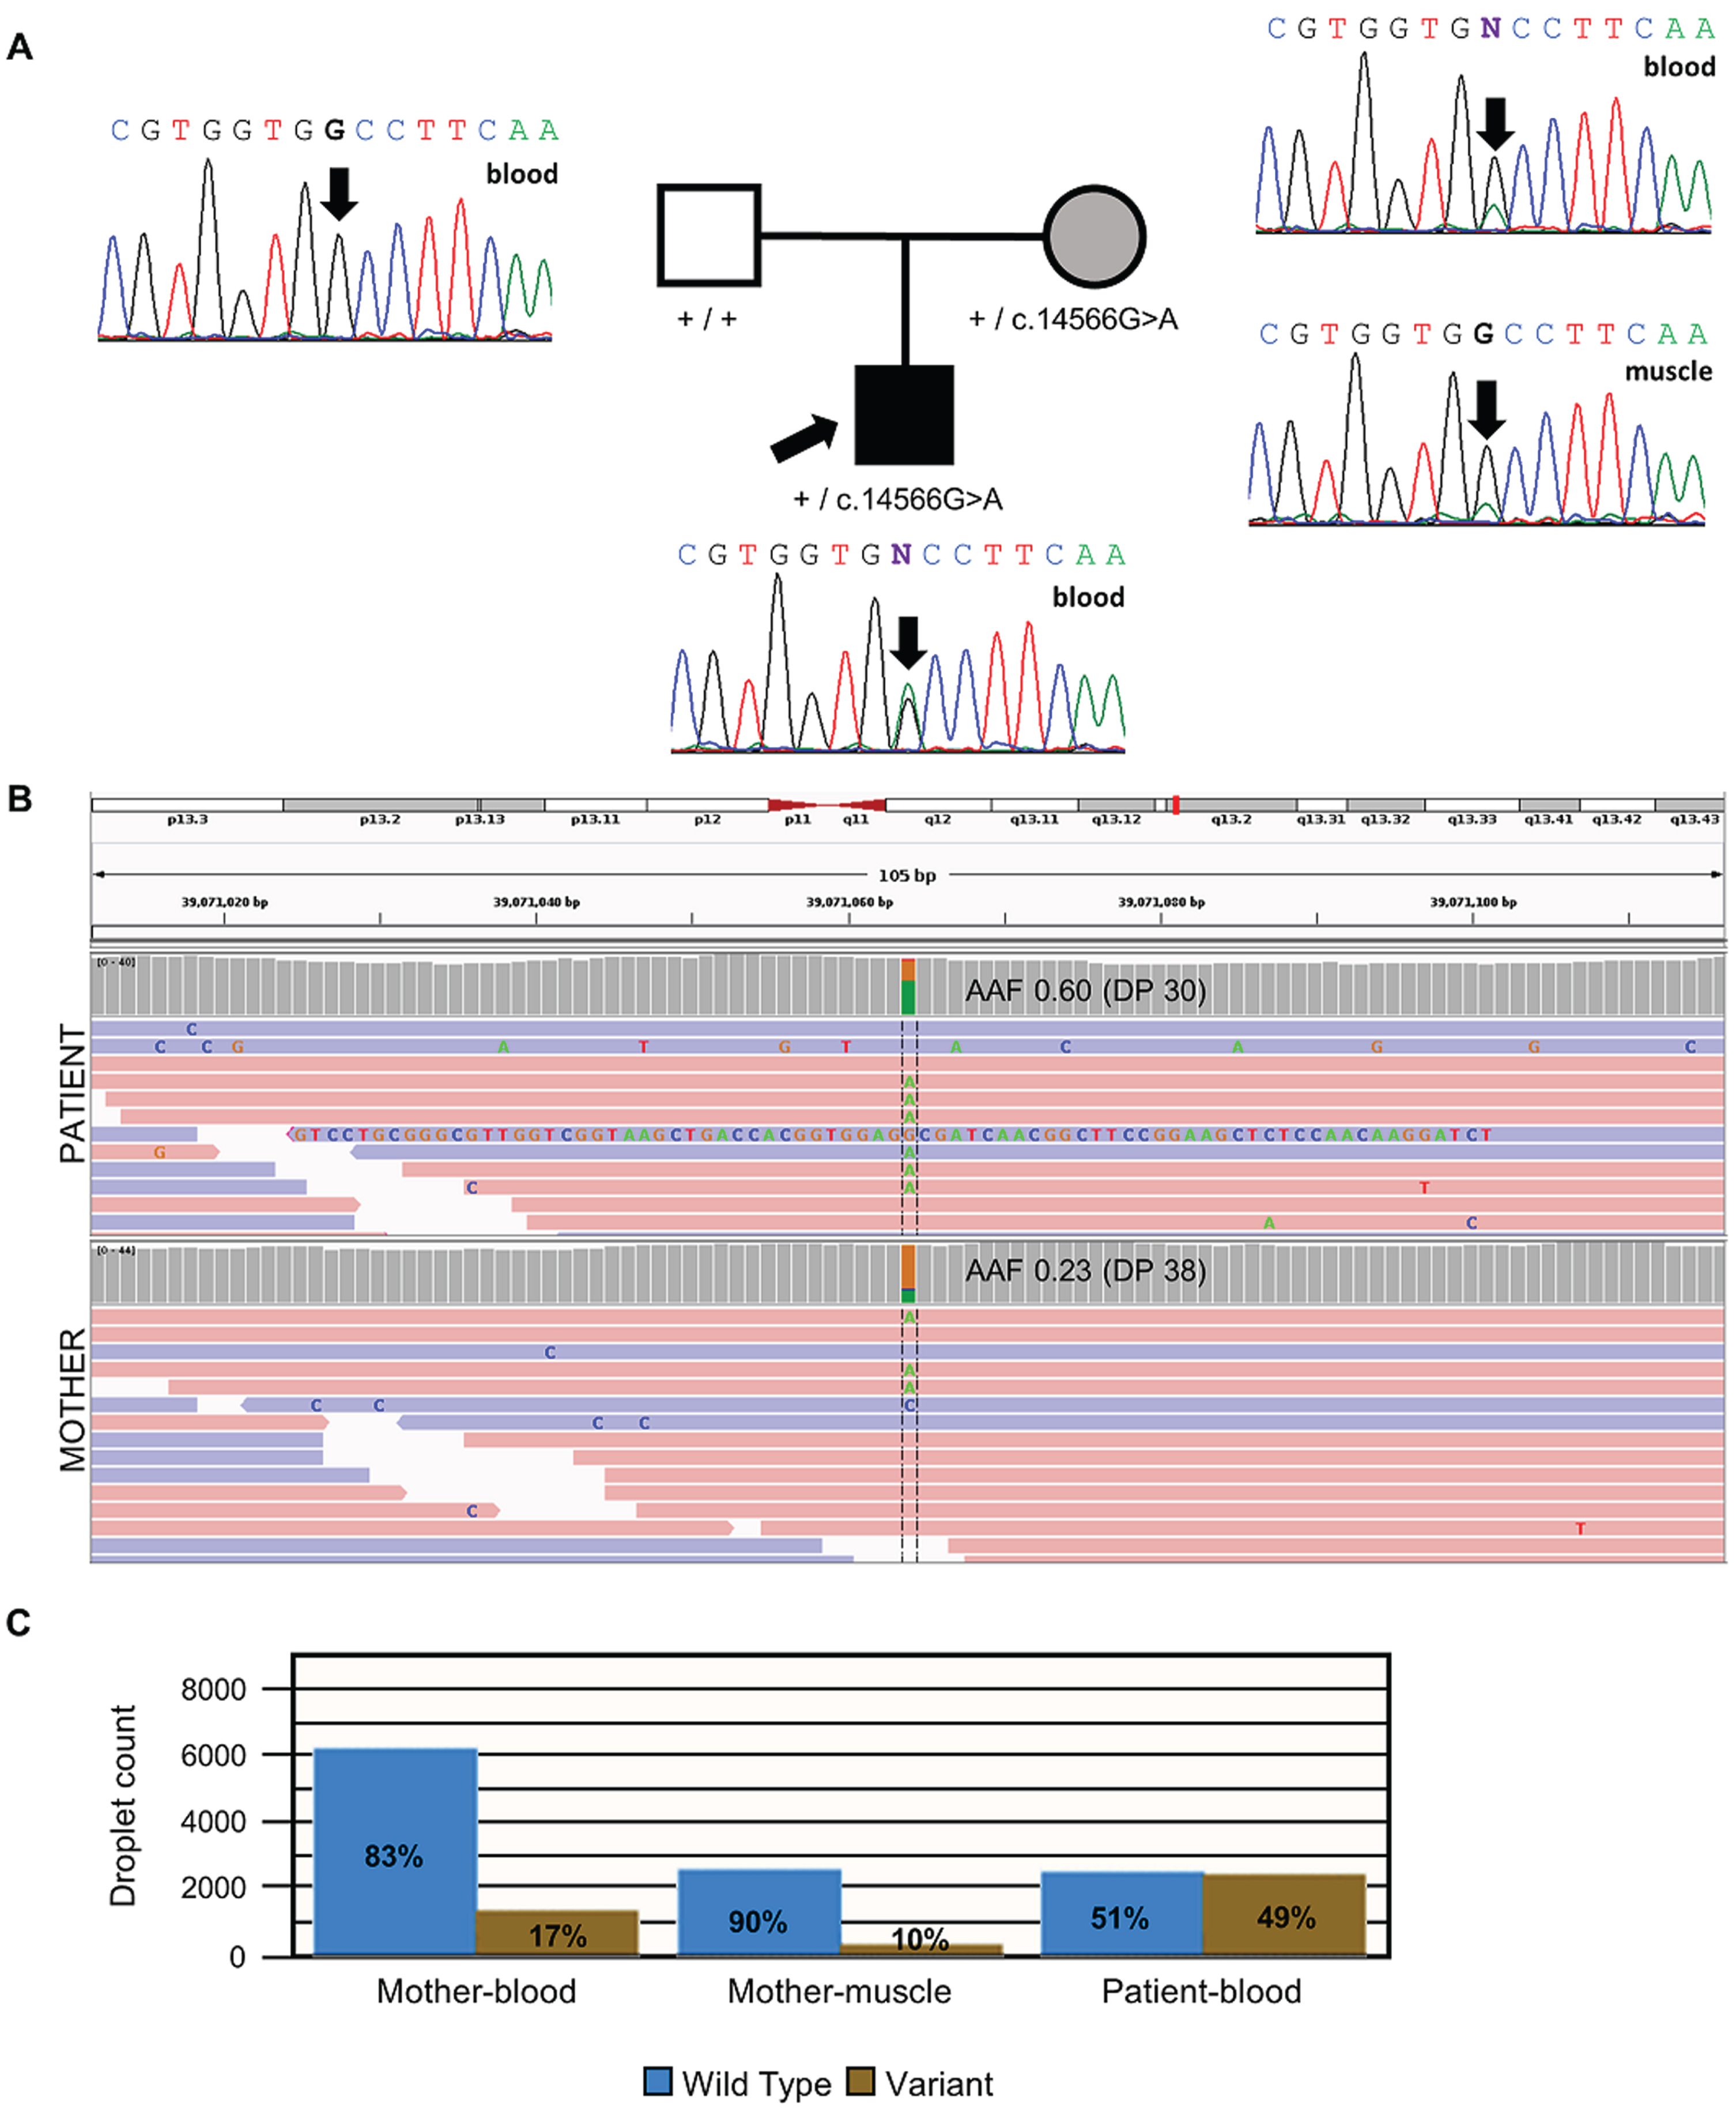 Molecular analysis of the RYR1 genetic variant. (A) The family pedigree and Sanger sequencing analysis. The electropherogram shows that the affected child is heterozygous for the RYR1(NM_000540.3):c.14566G > A variant (arrow). The asymptomatic mother was found to be also heterozygous when blood-derived DNA was analyzed. Nevertheless, the mosaicism is reflected in the small green peak not present in the father. The analysis of a second tissue (muscle-derived DNA) in the mother confirmed the mosaicism (again, a small green peak). (B) IGV screenshot of genome sequencing of the results from blood-derived DNA of the affected child and his mother, including the variant position Chr19:39,071,064 (hg19). Mother mosaicism is observed in the lower AAF (0.23) when compared to the child with congenital myopathy (0.60). (C) Droplet digital PCR results confirmed the mosaic condition of the mother. Abbreviations: AAF, alternative allele frequency; DP, depth.